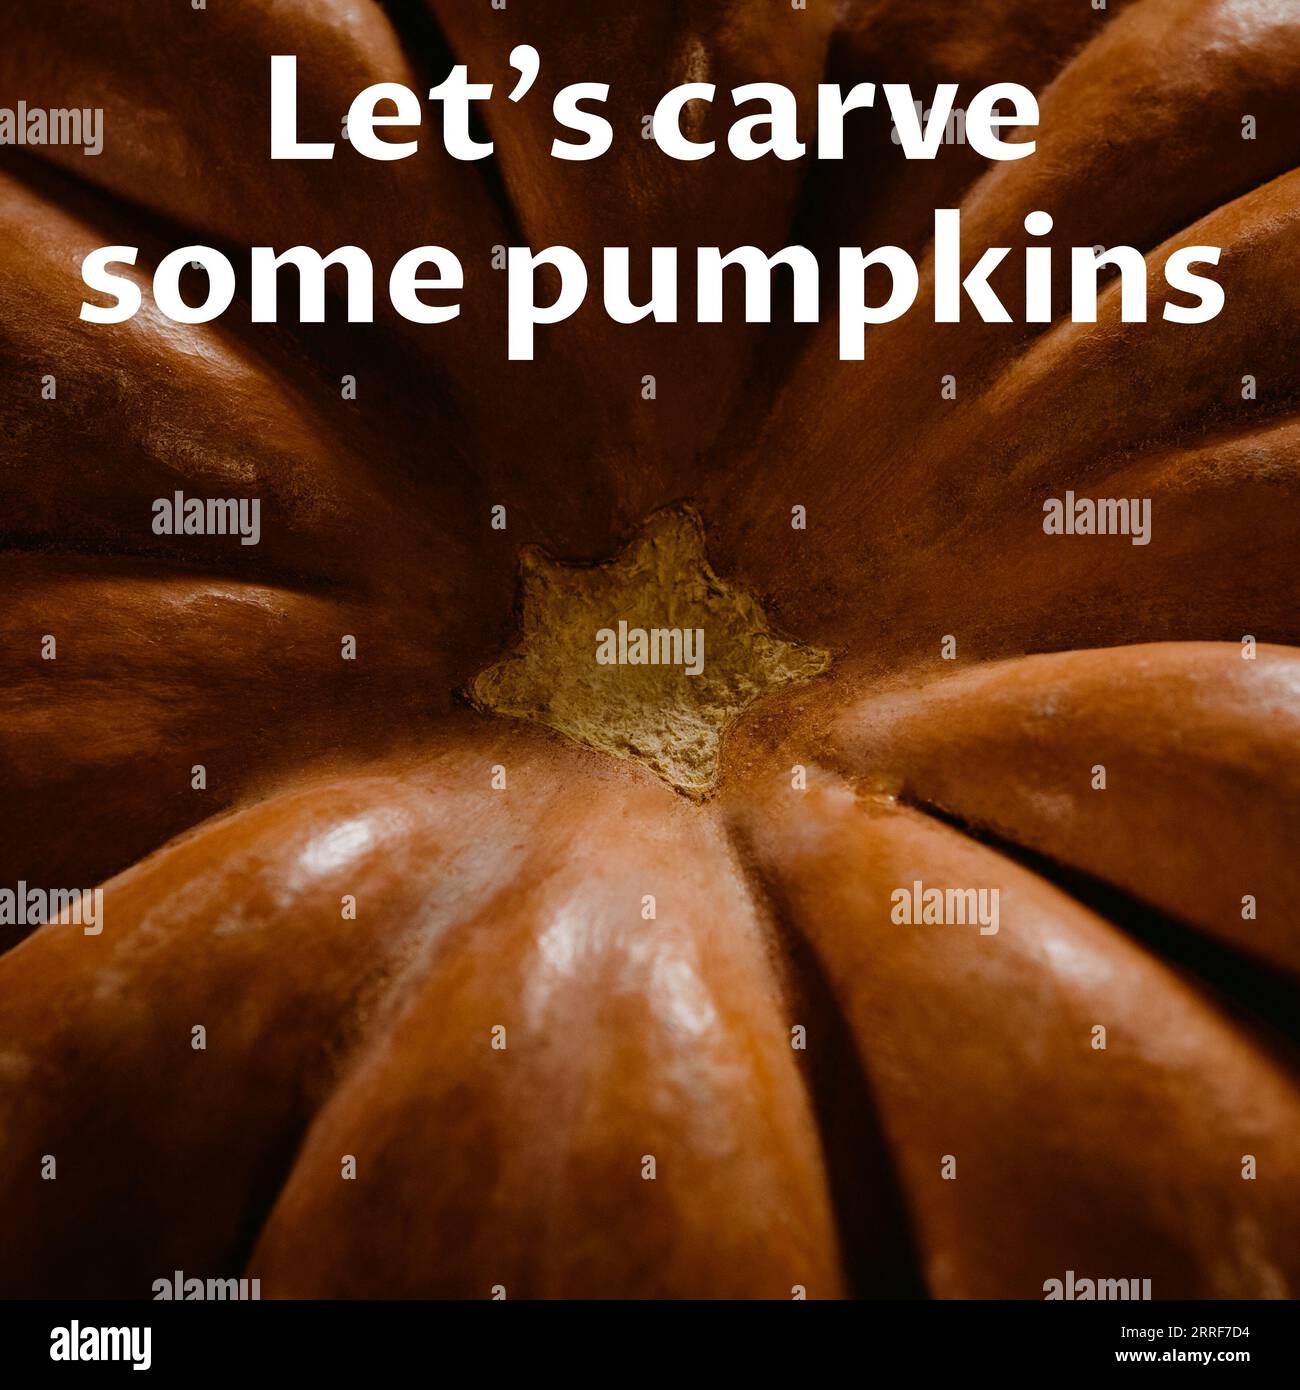 Composite of let's carve some pumpkins text and halloween pumpkin background Stock Photo